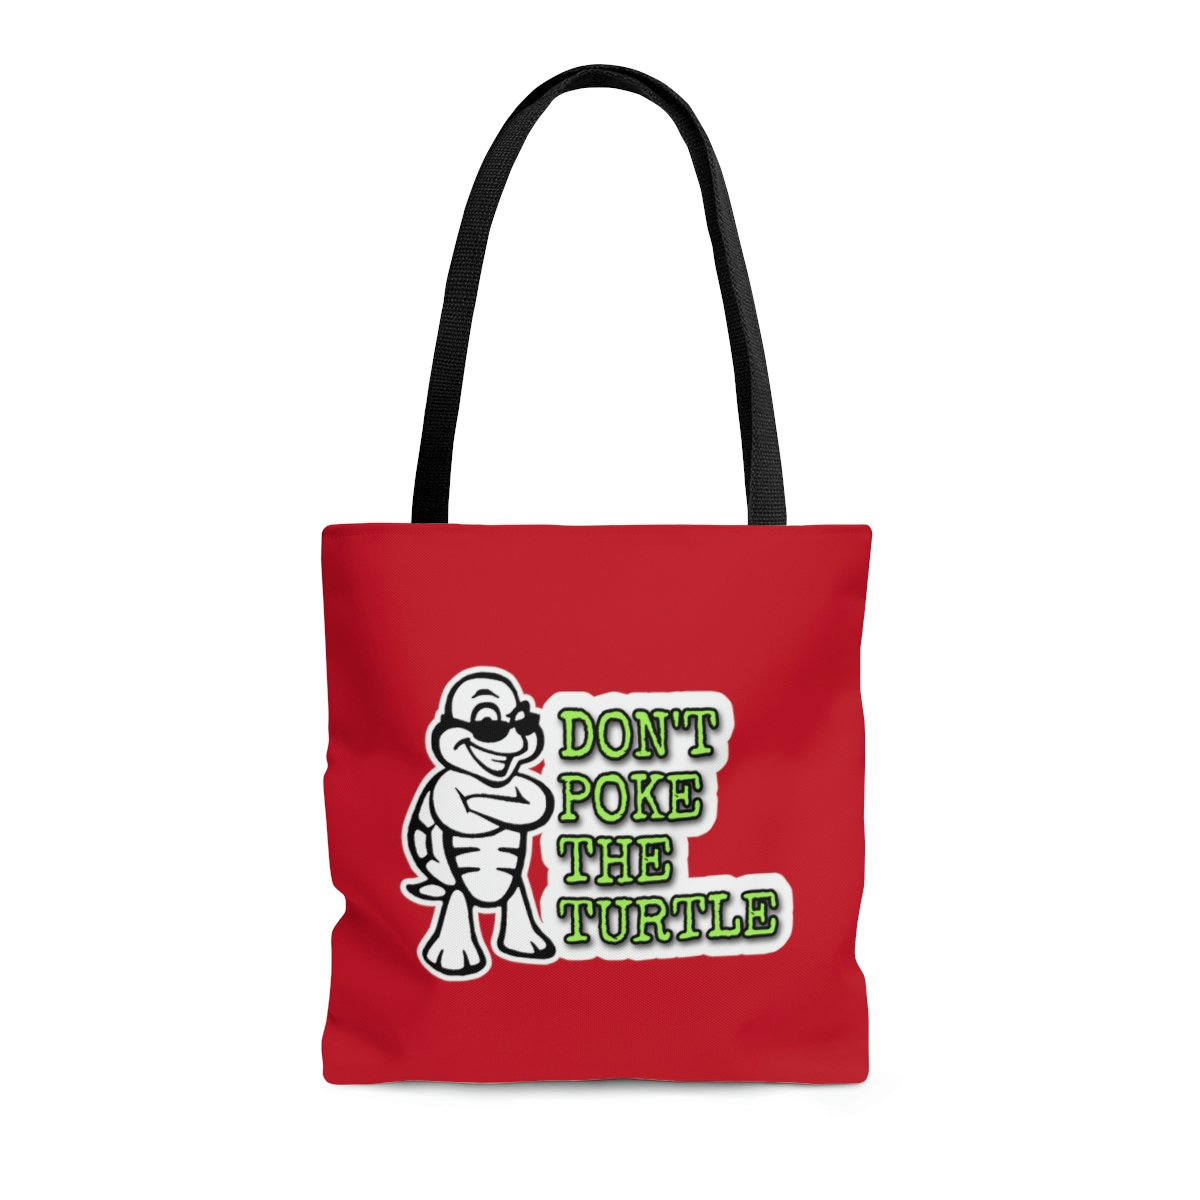 Don't Poke the Turtle - Tote Bag Dark Red - TB Daily News